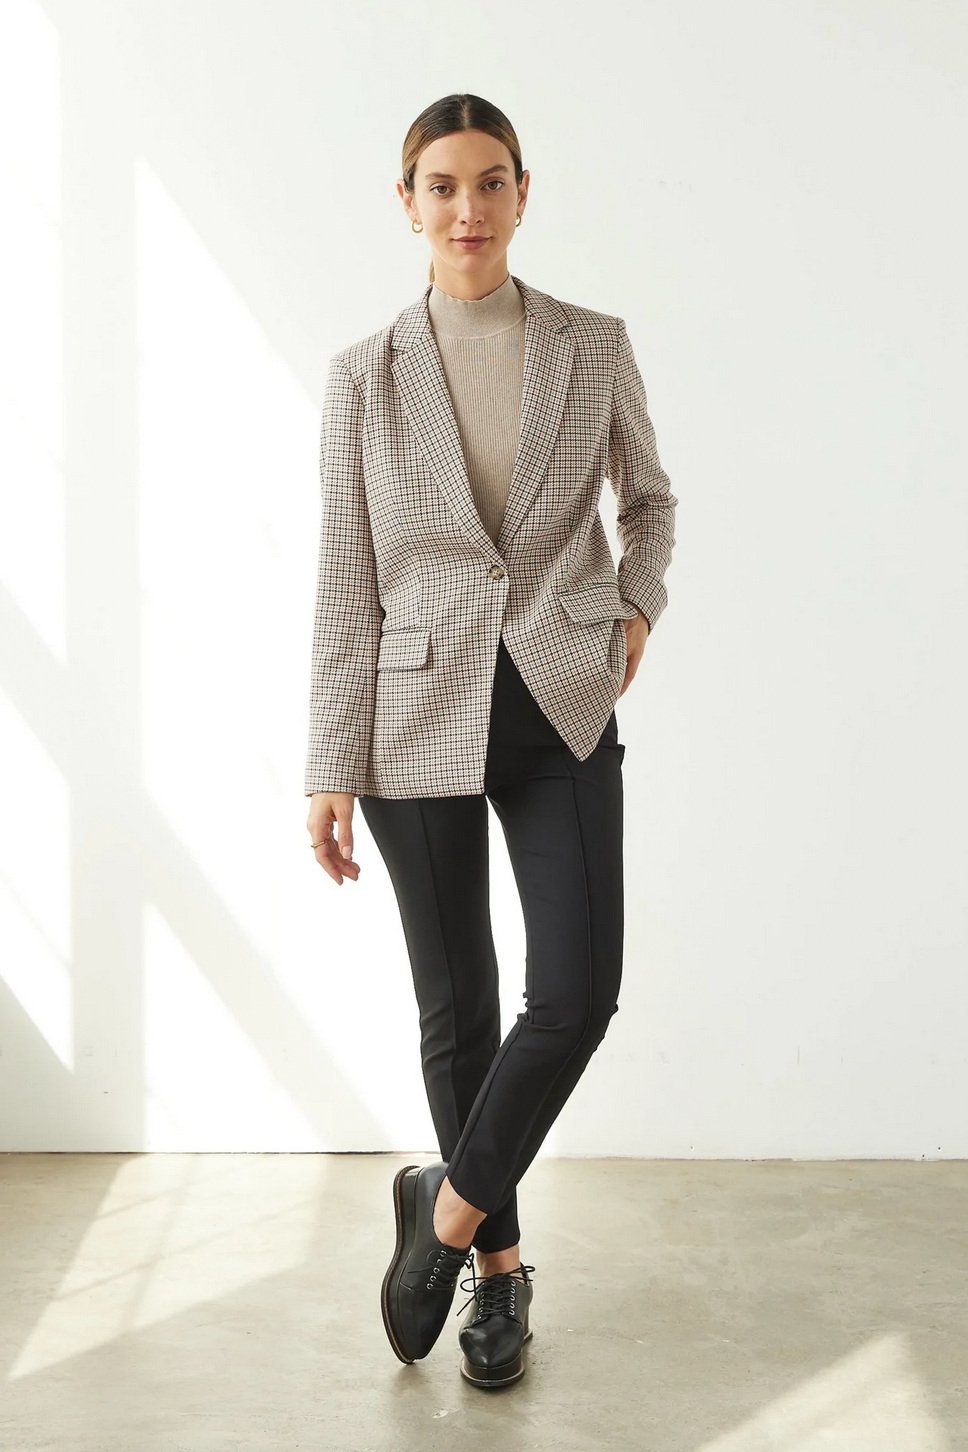 6 Small Businesses to Shop for Workwear